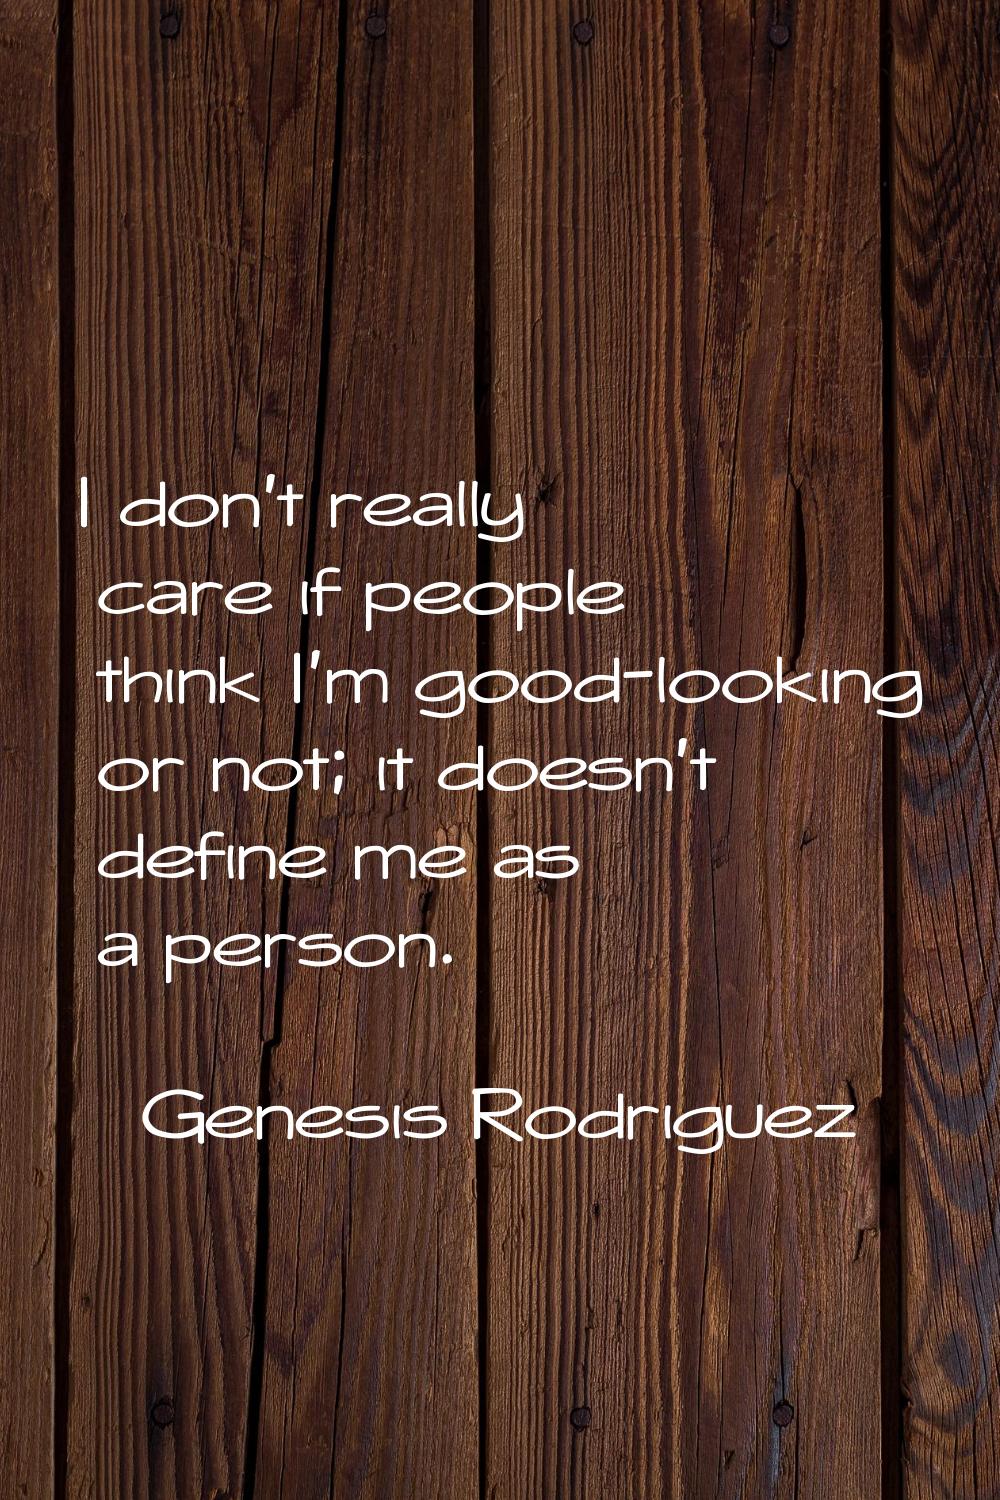 I don't really care if people think I'm good-looking or not; it doesn't define me as a person.